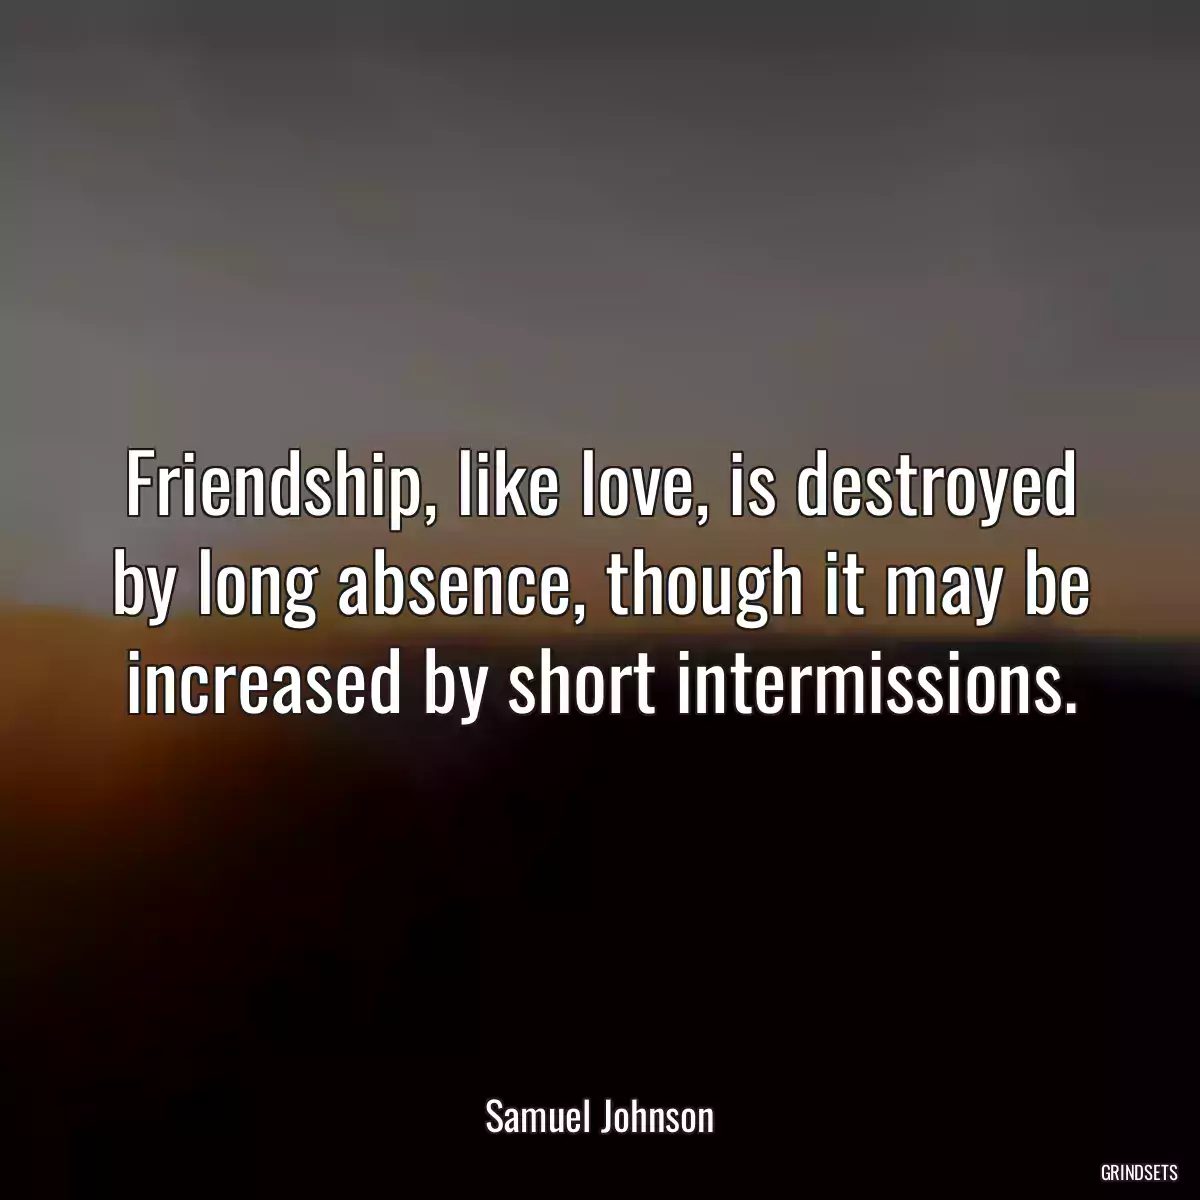 Friendship, like love, is destroyed by long absence, though it may be increased by short intermissions.